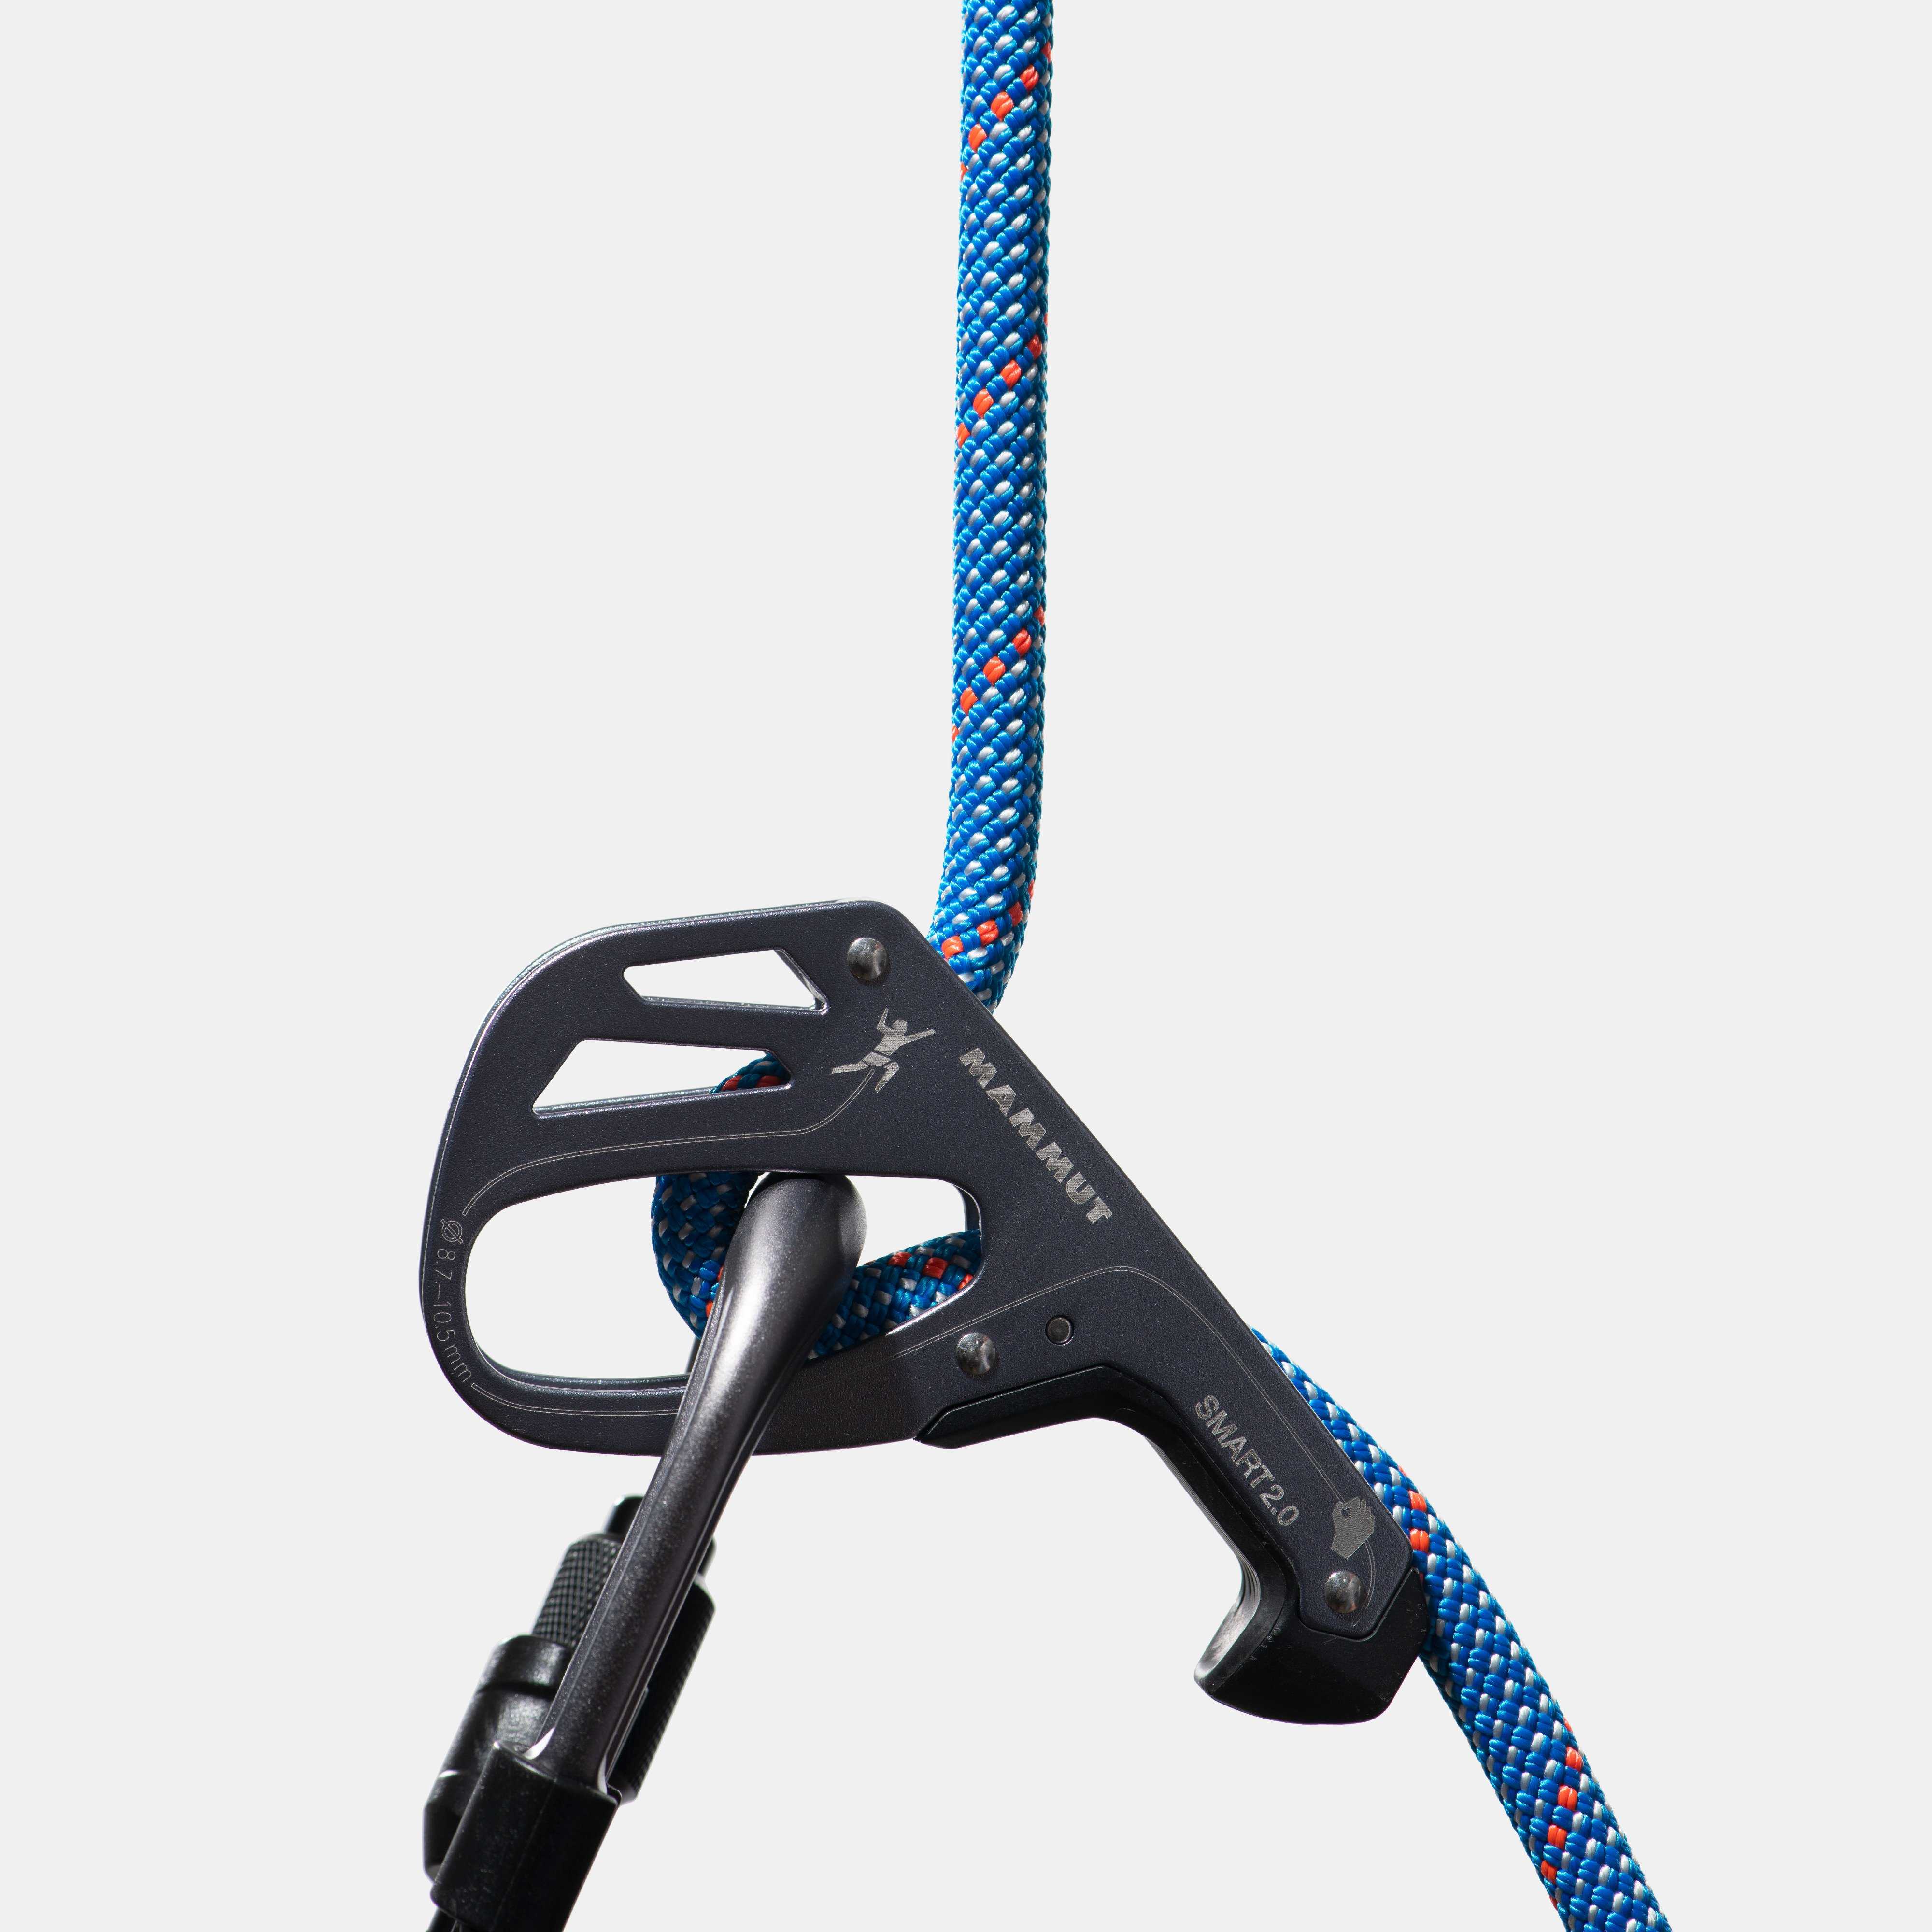 Climbing Equipment, Ascender Harness Rope Carabiner and More